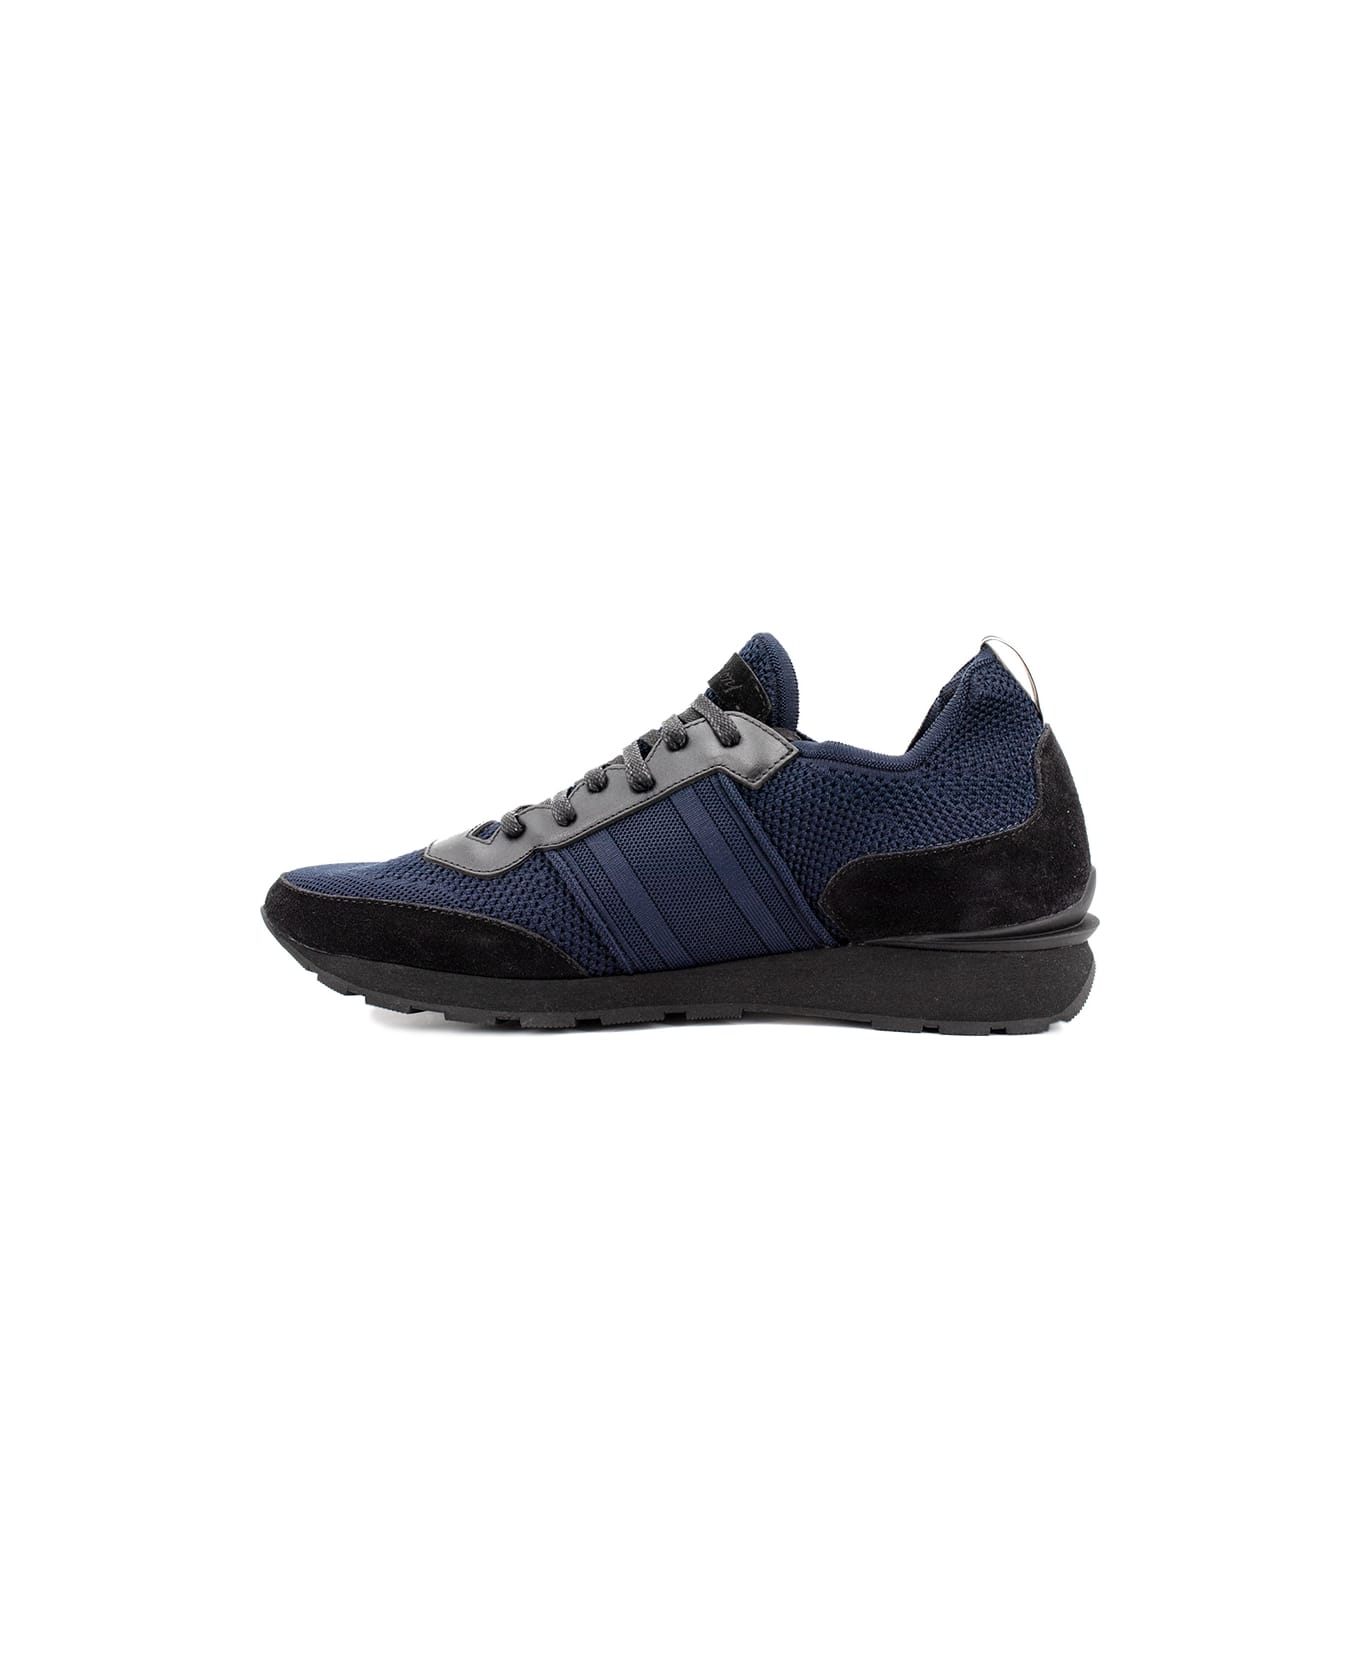 Brioni Sneakers - ALL NAVY